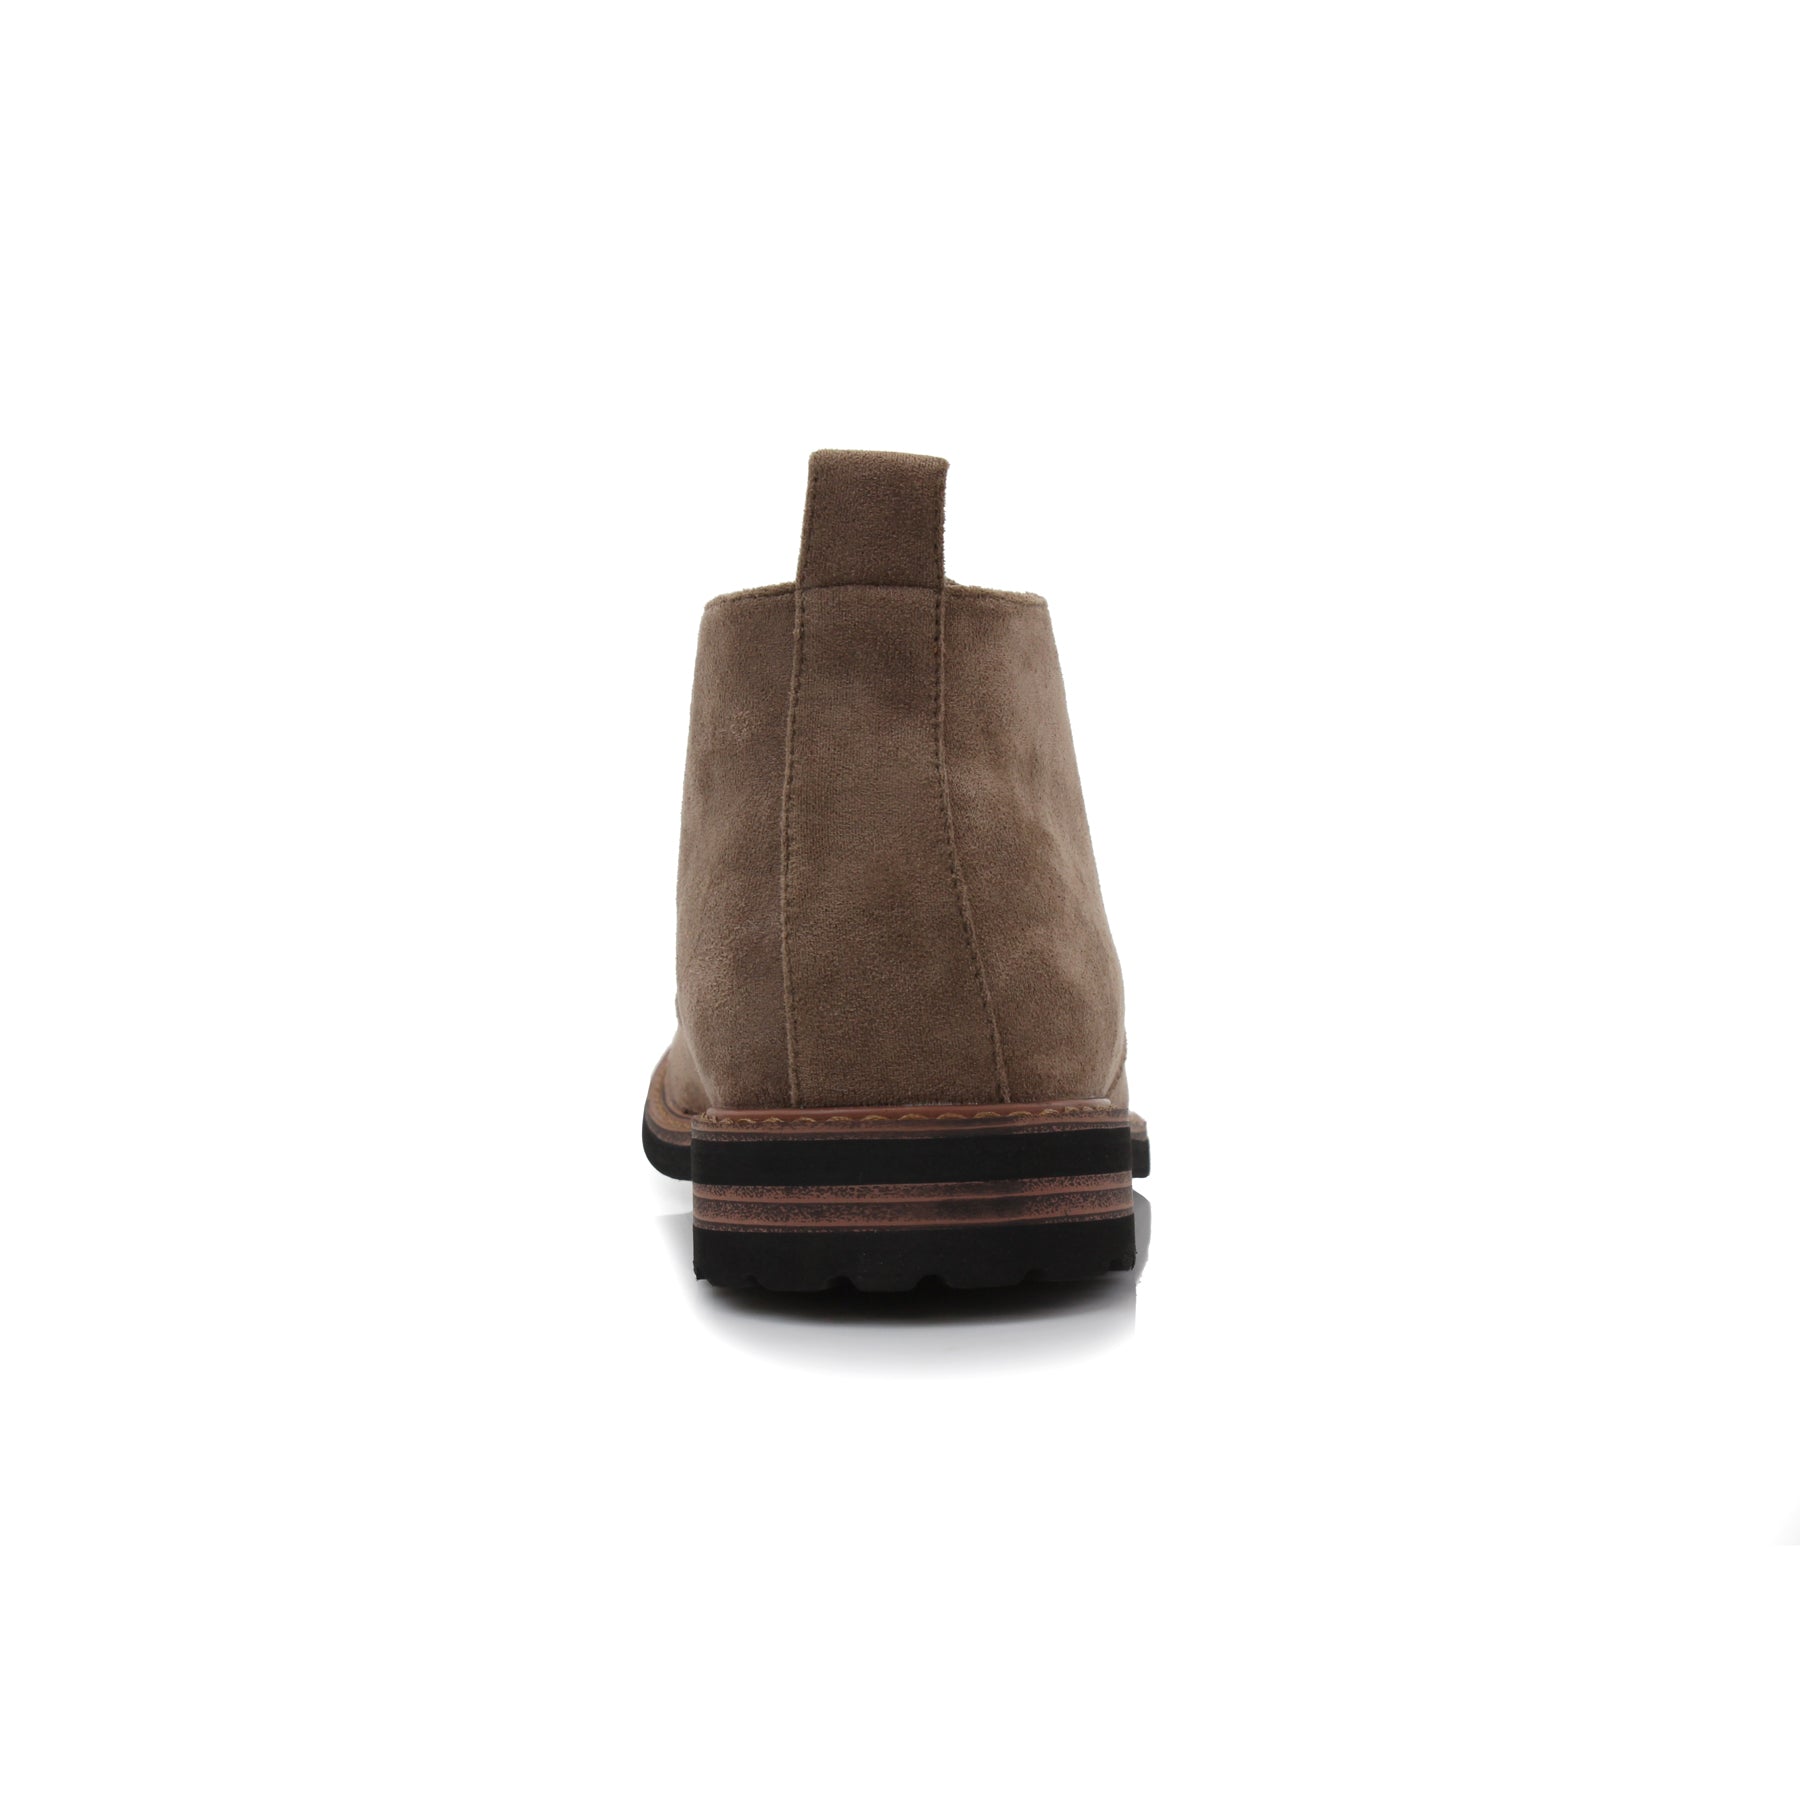 Suede Chukka Boots | Pablo by Ferro Aldo | Conal Footwear | Back Angle View